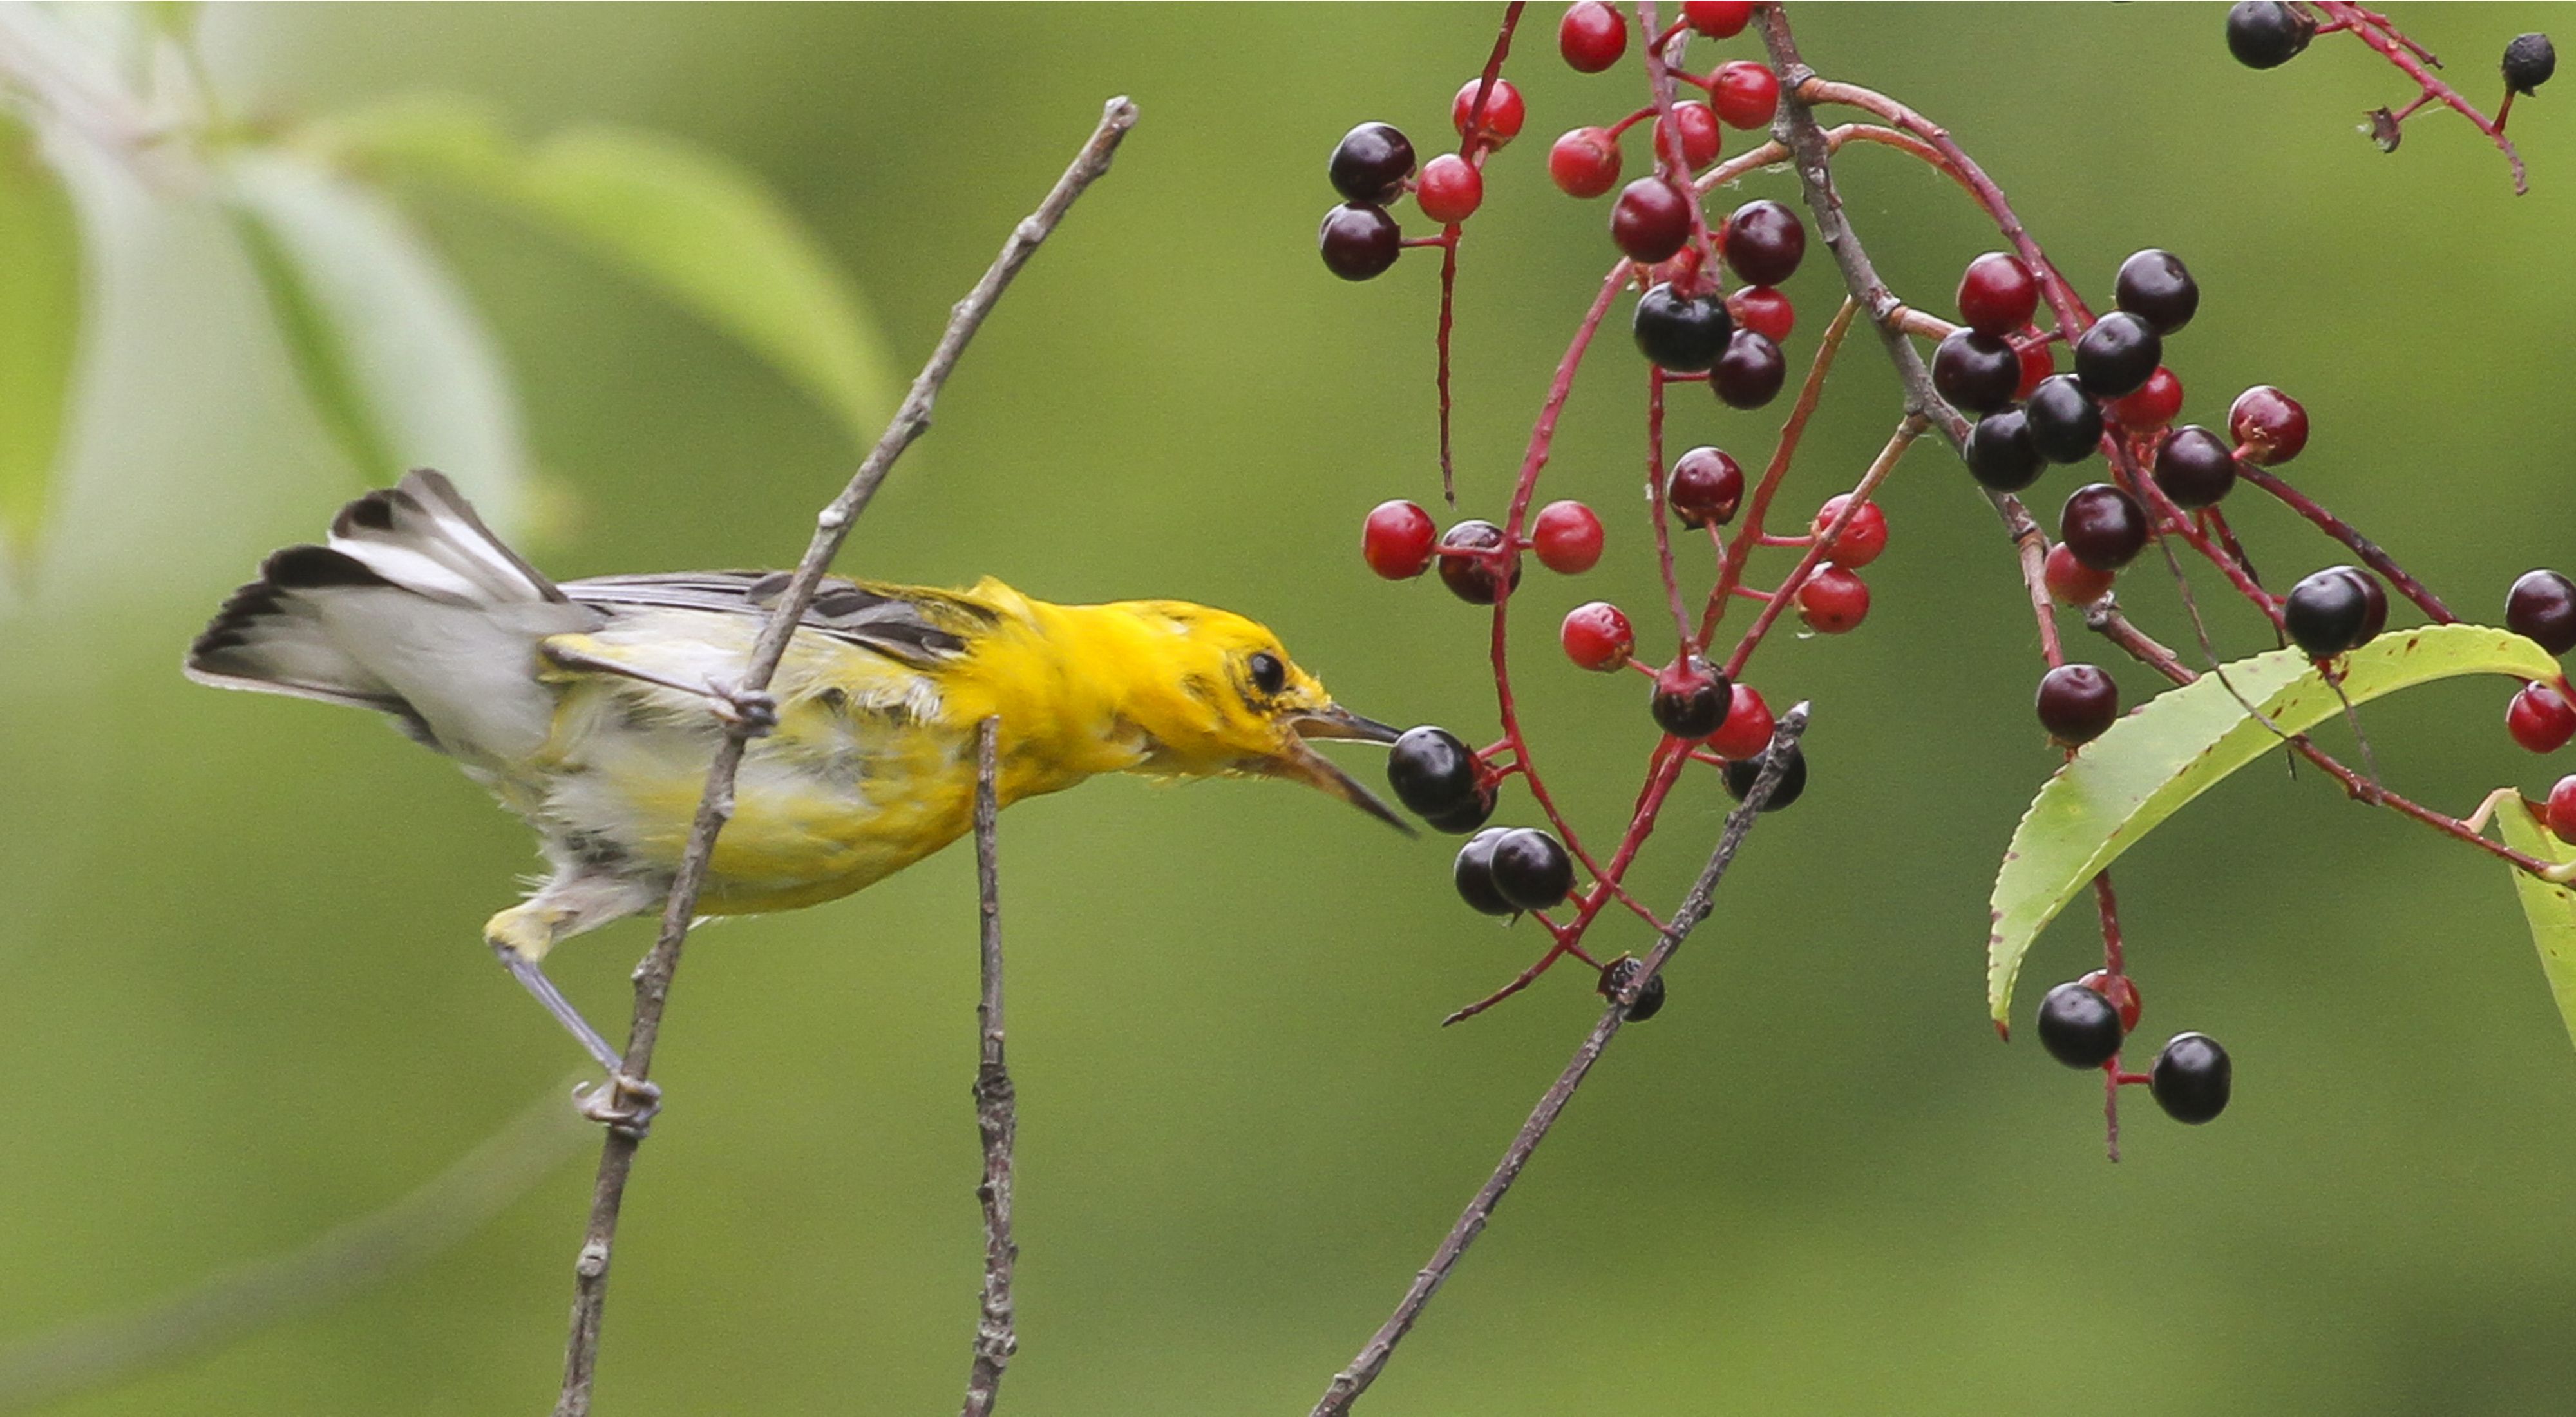 A yellow bird bites at blue and red berries in a forest.